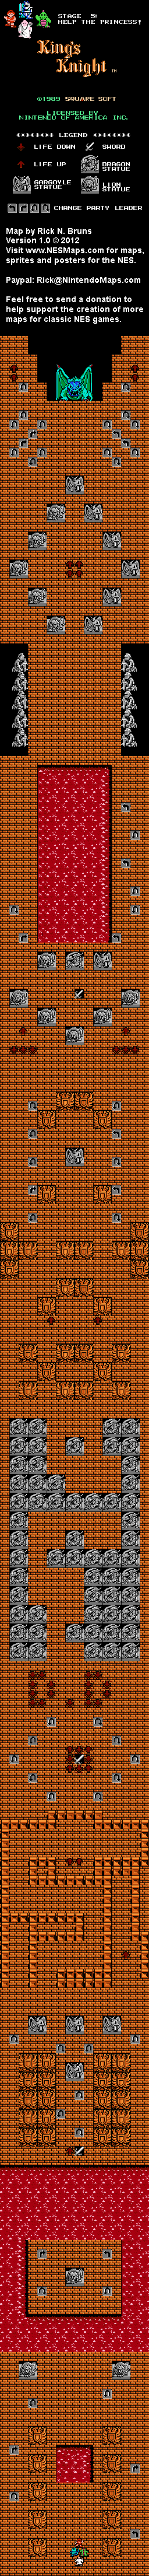 King's Knight - Stage 5 - Nintendo NES Map